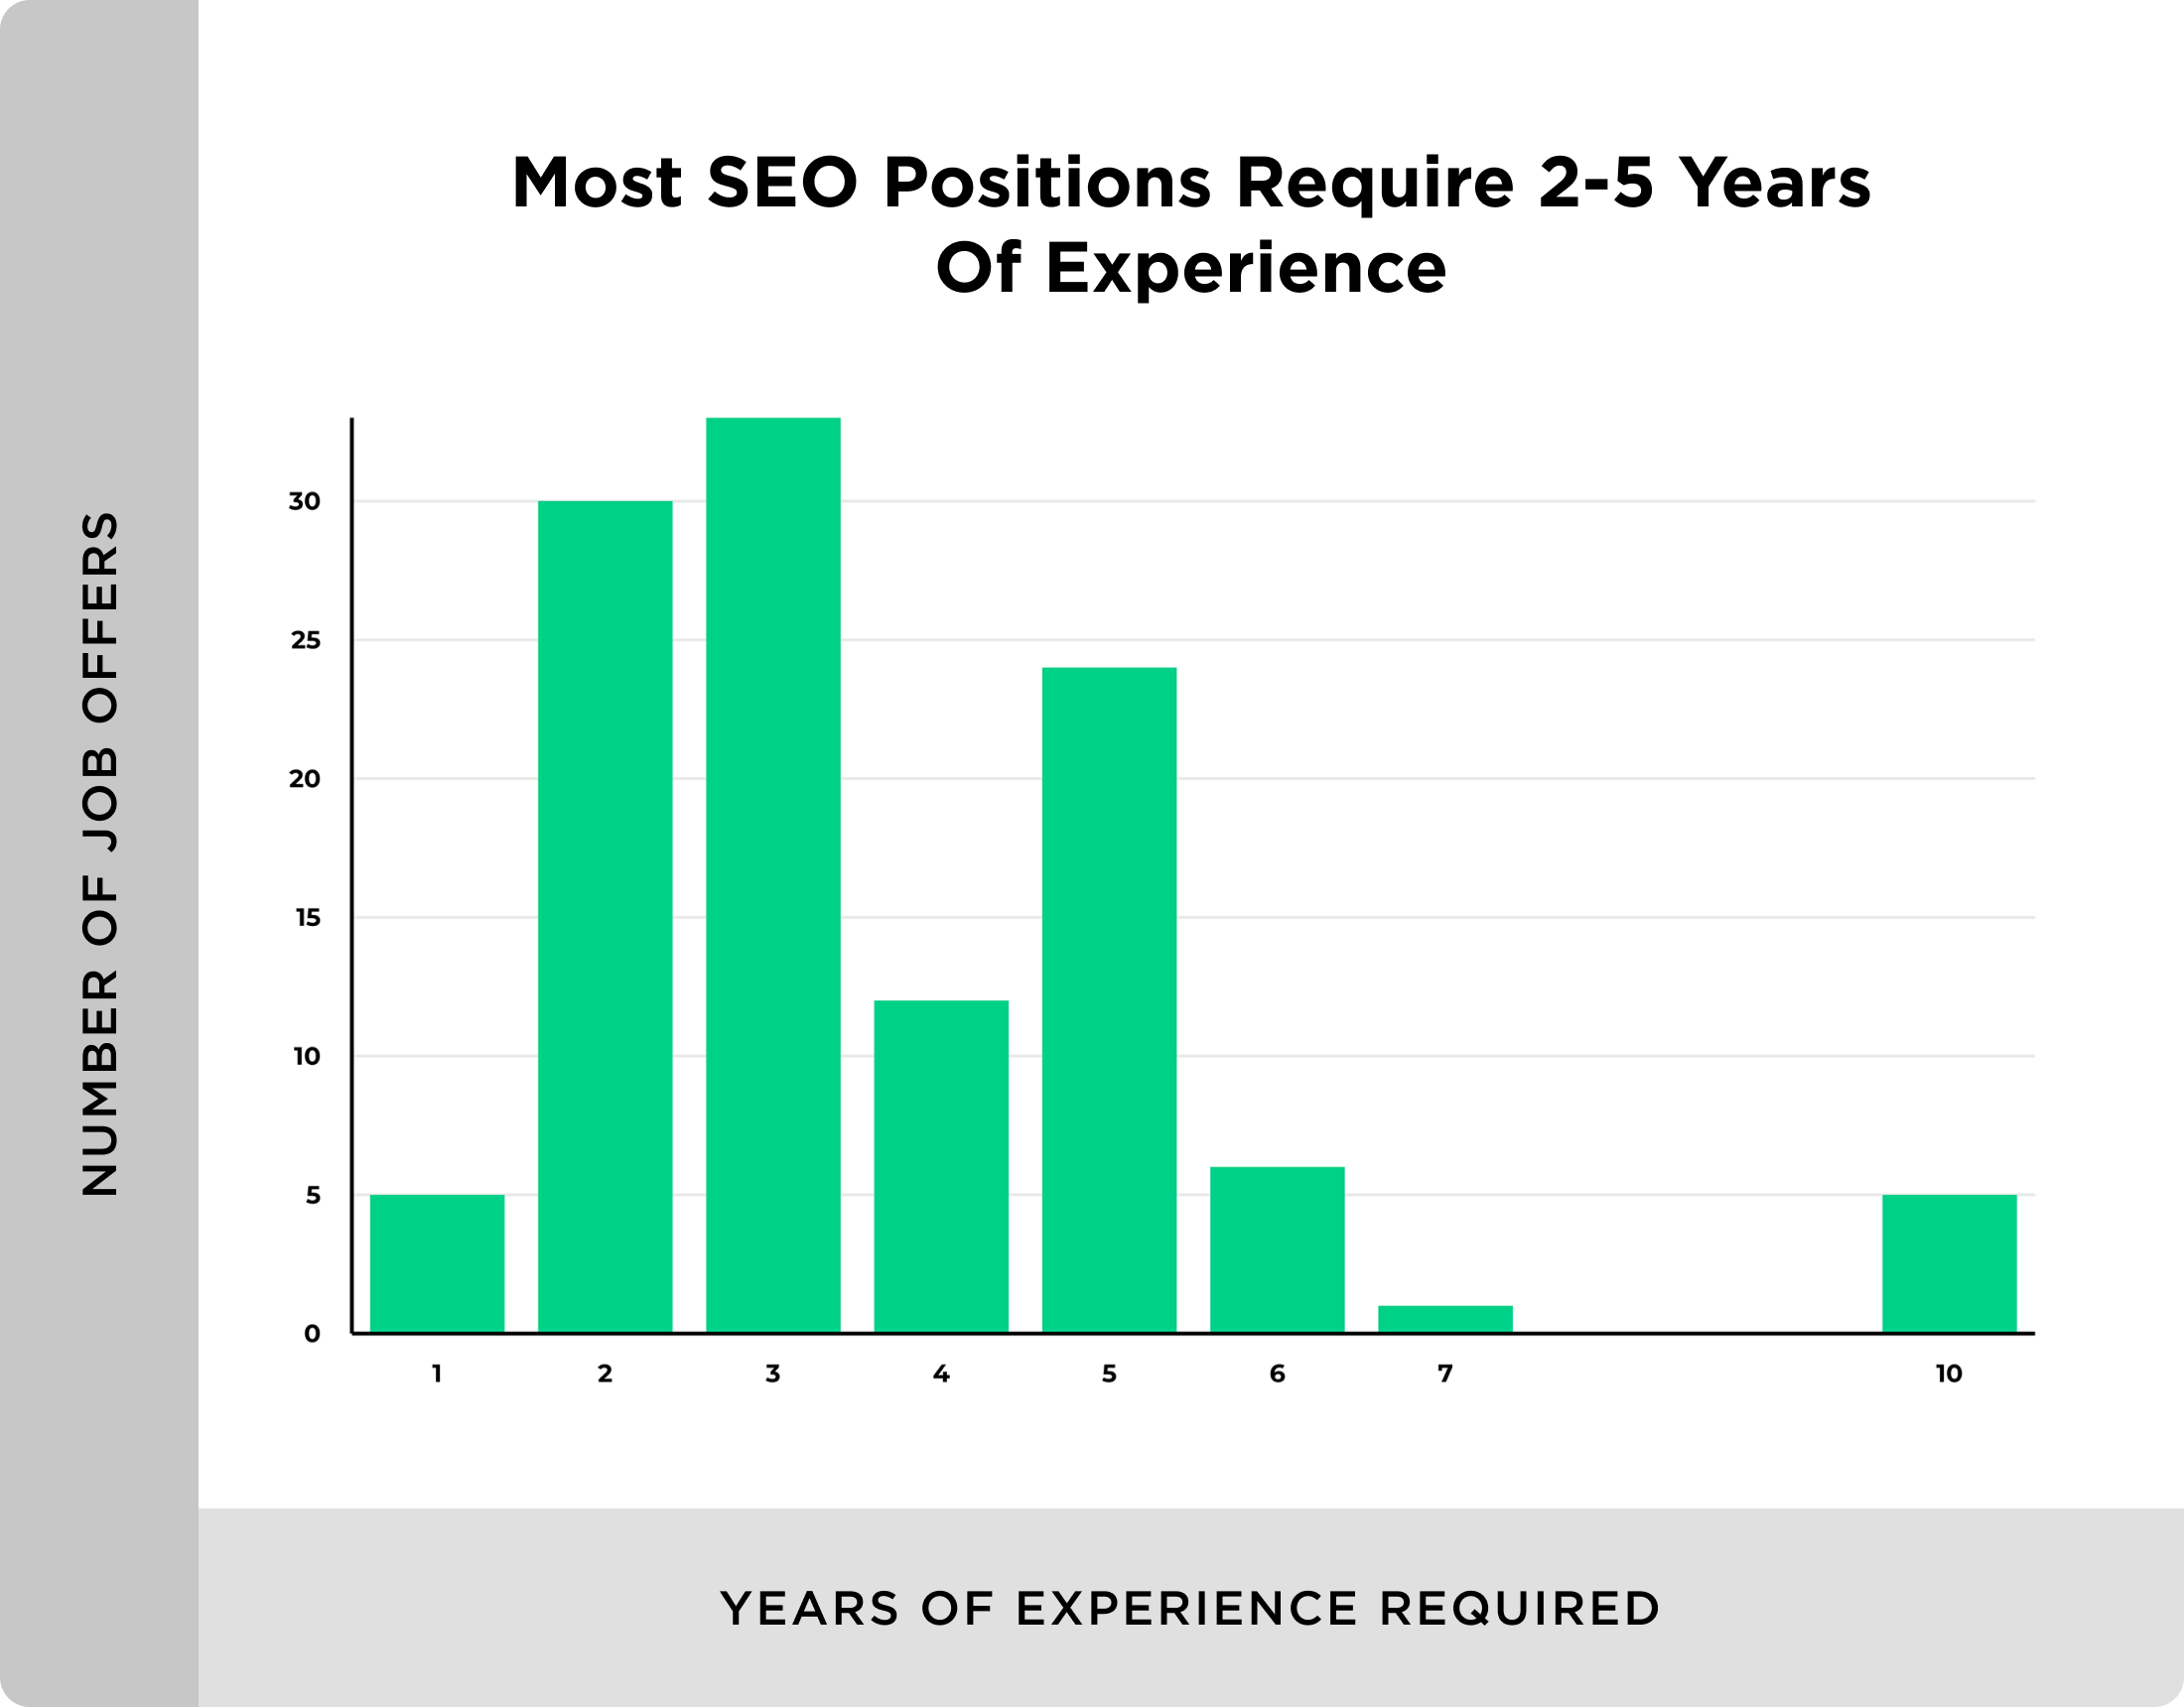 Years of experience required for SEO position